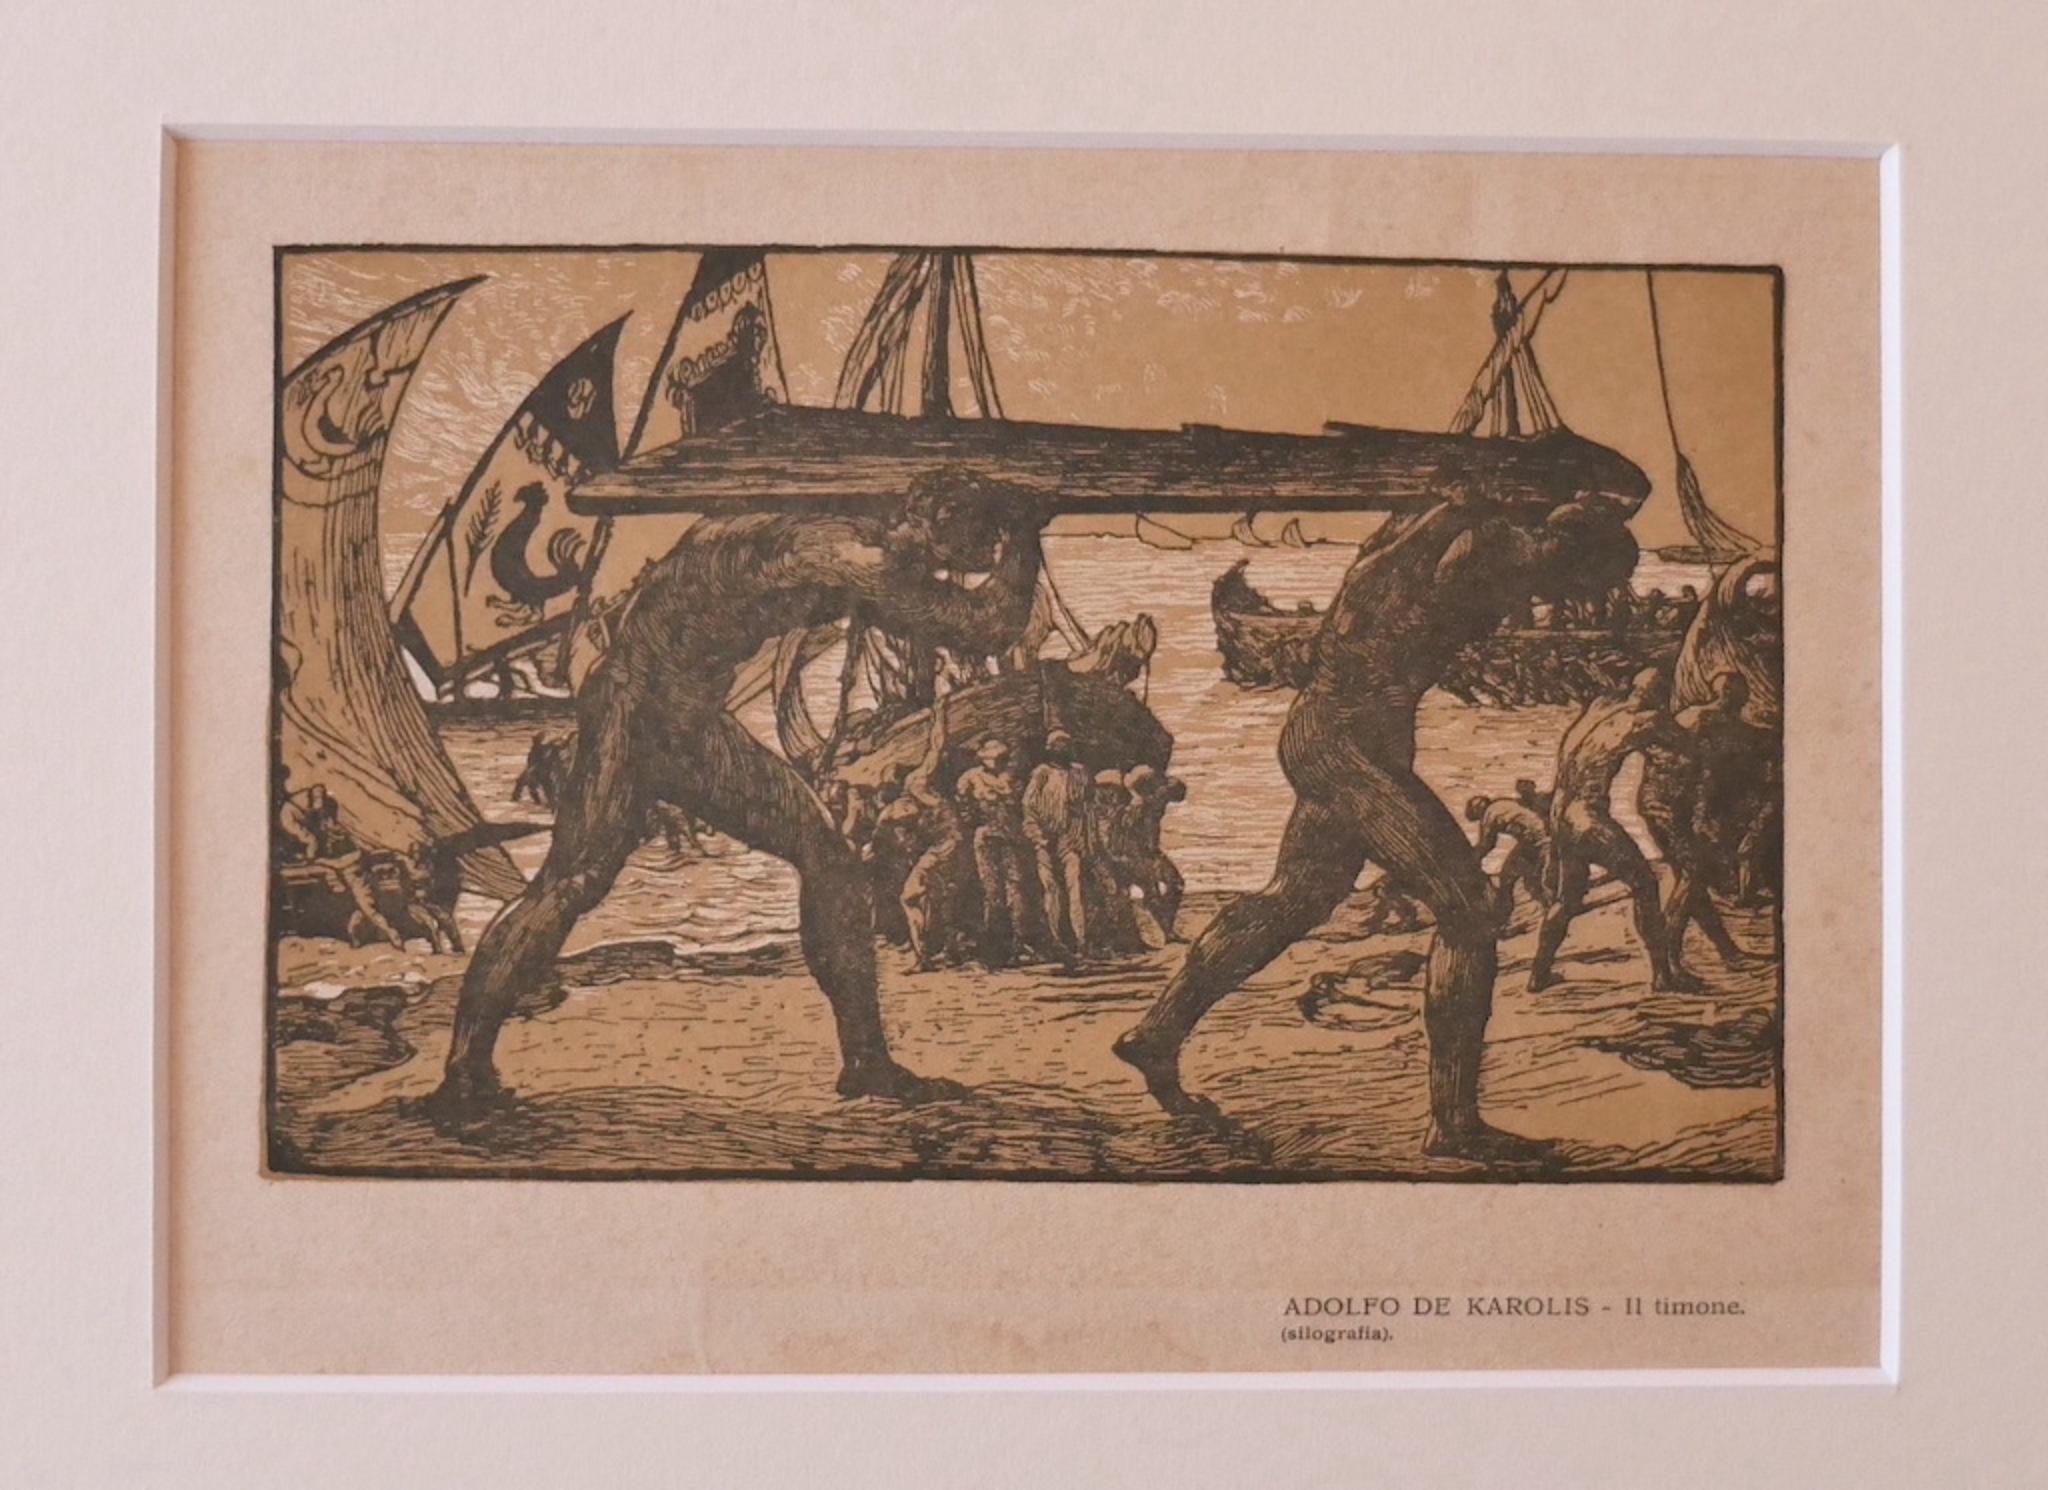 The Rudder is an original xilograph on ivory-colored paper realized by Adolfo De Karolis in 1925 ca.

The state of preservation is good.

Signed and titled, Adolfo De Karolis - Il Timone, silografia, on the lower right.

Adolfo De Carolis or De